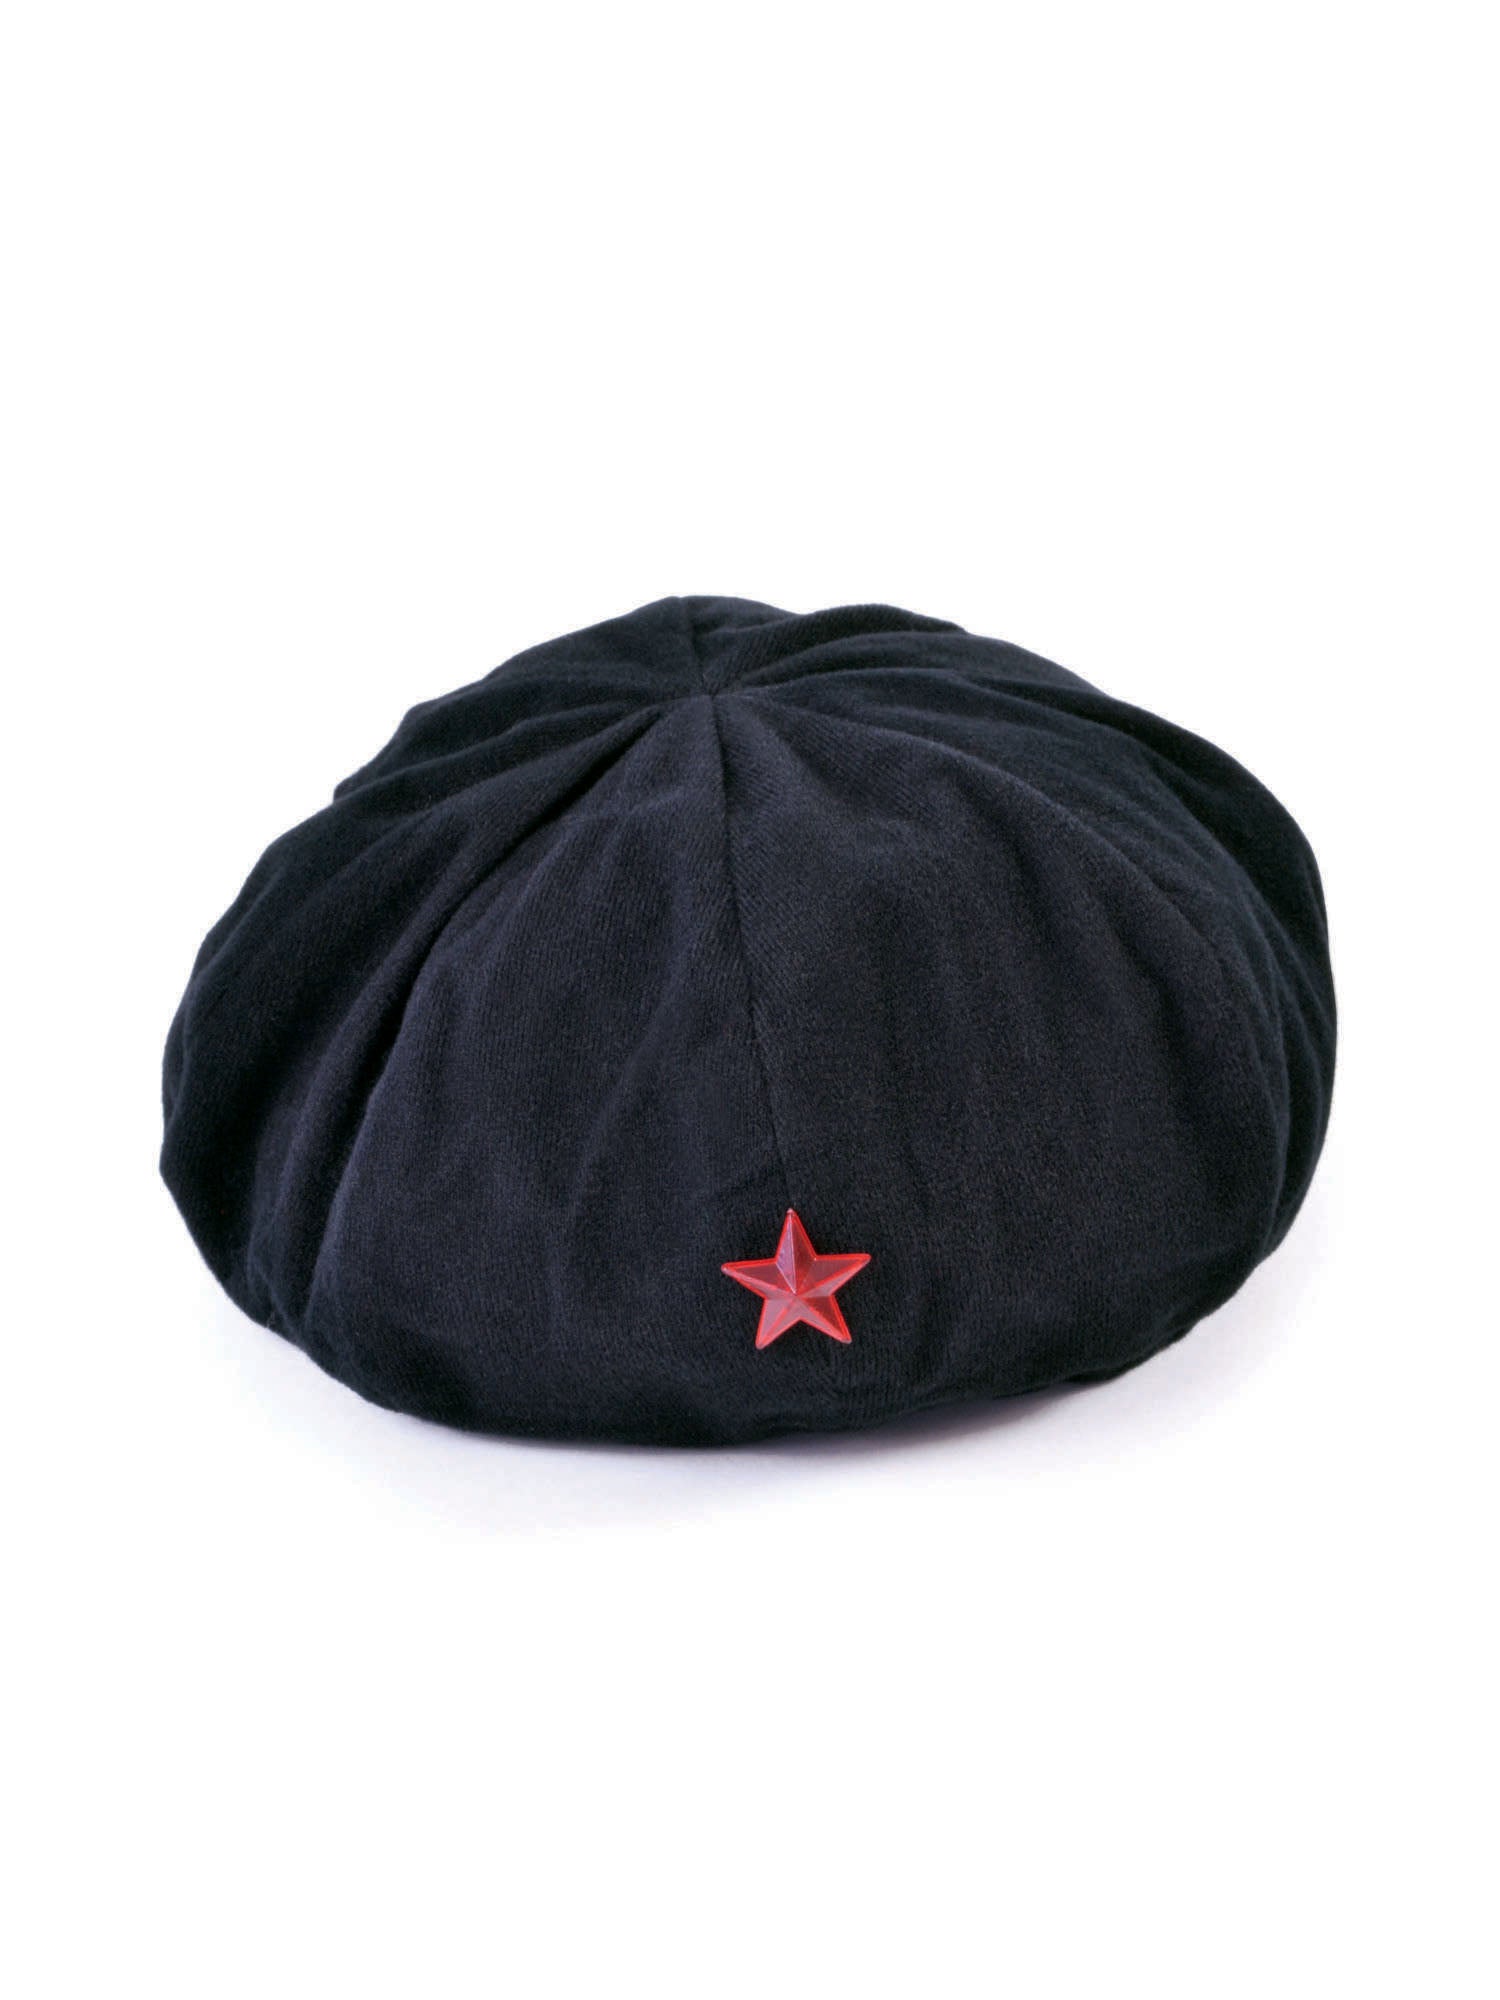 Russian, Multi, Generic, Hat, One Size, Front